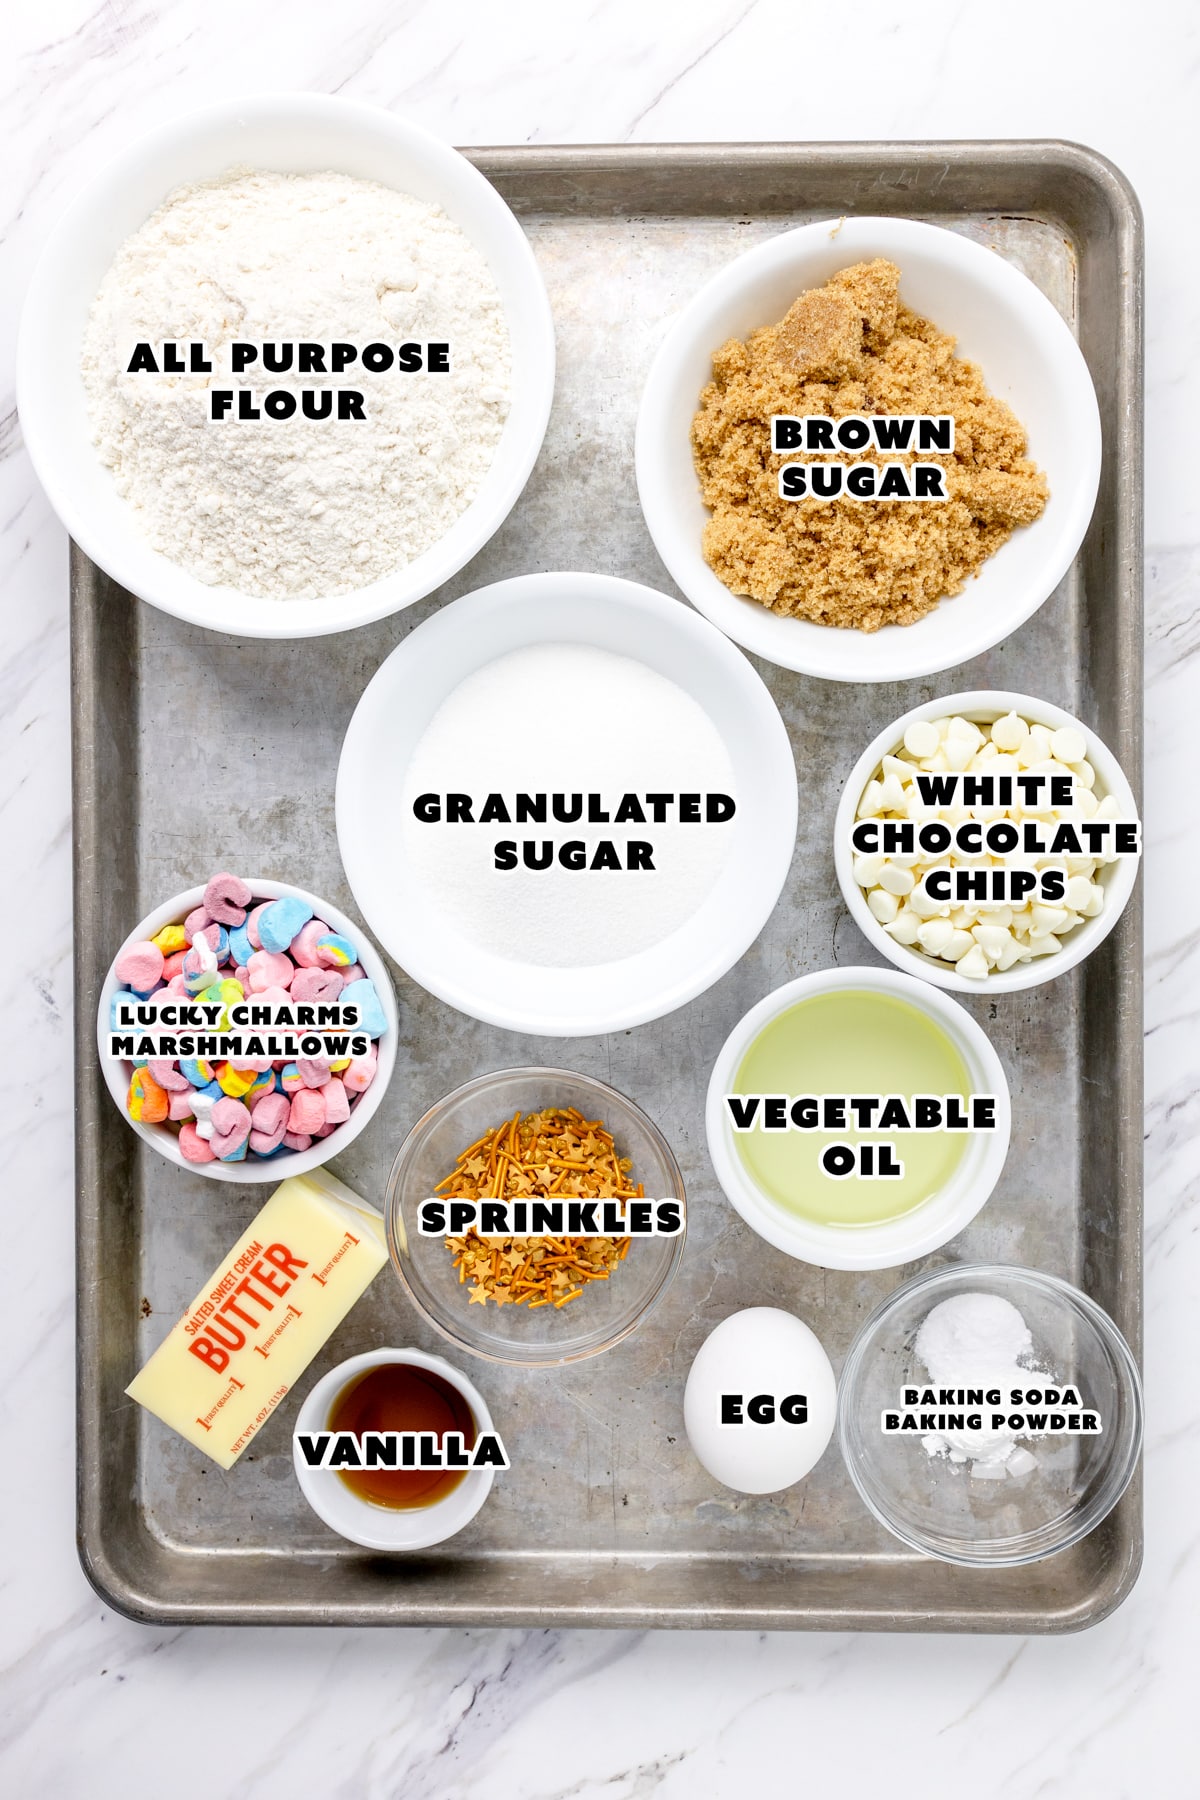 Top view of ingredients needed to make Lucky Charms Cookies in small bowls on a baking tray.